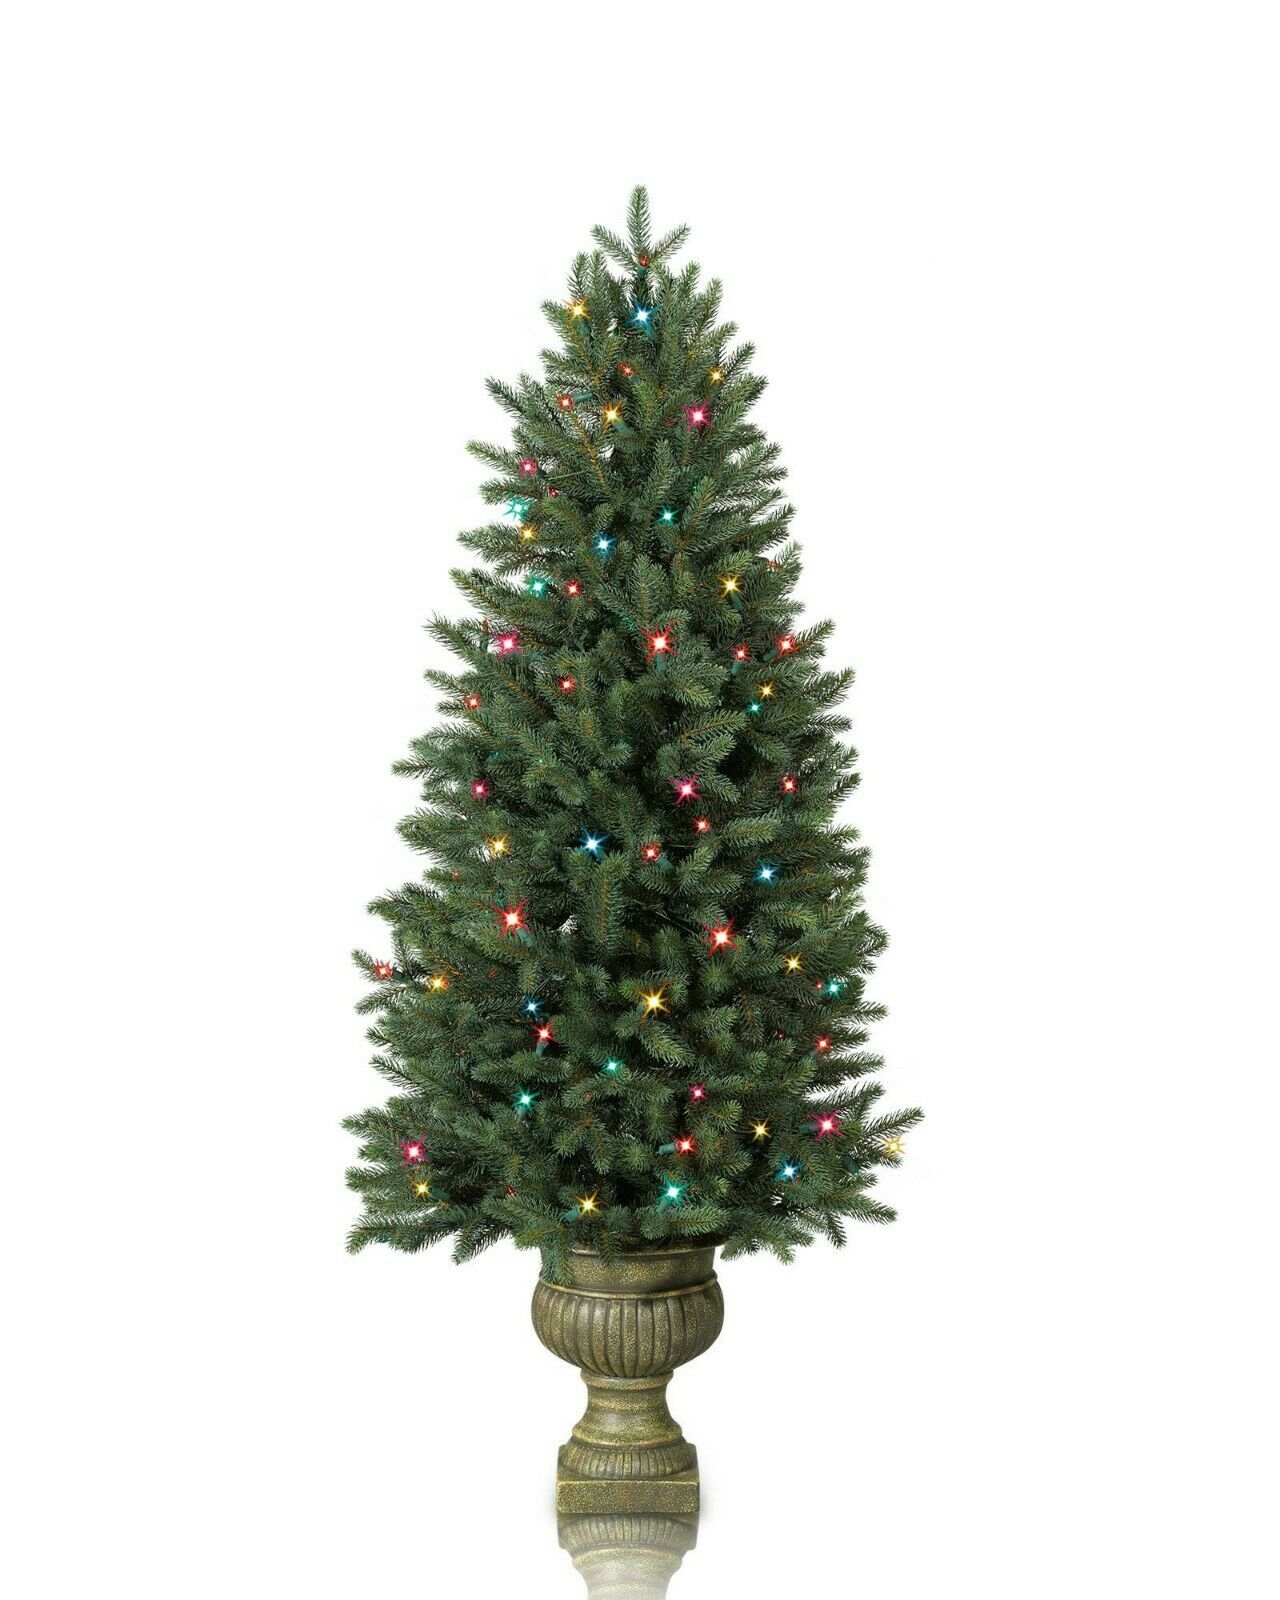 New In Box Balsam Hill Colorado Mountain Spruce 4' Potted Tree With Multi Lights